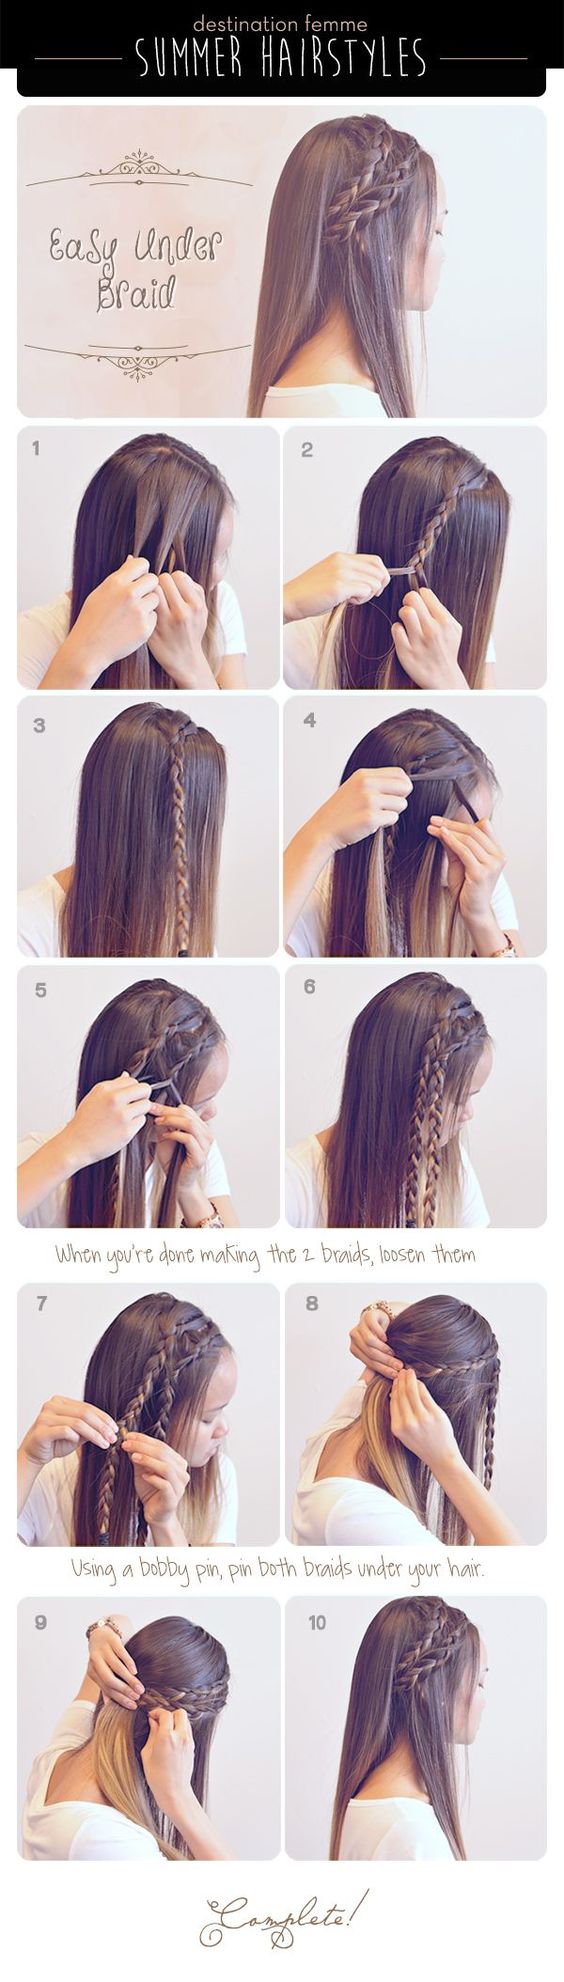 cute-hairstyles-to-do-with-long-hair-64_3 Cute hairstyles to do with long hair